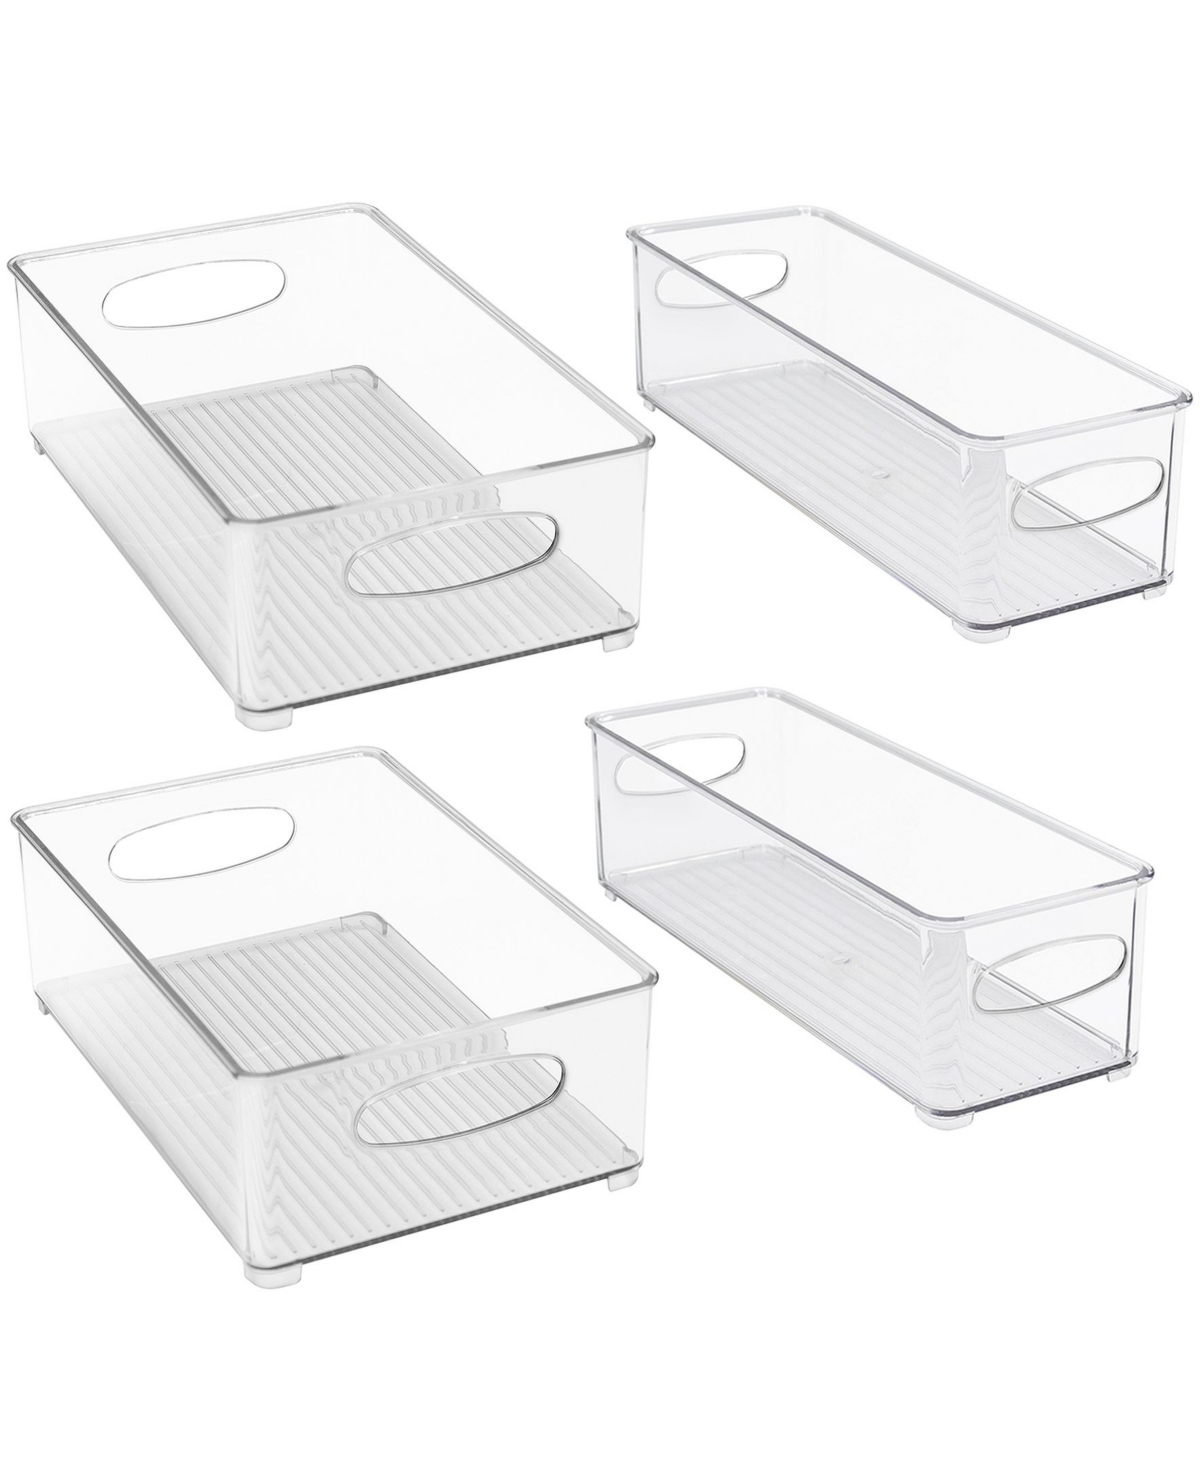 Container Bin Set - Clear